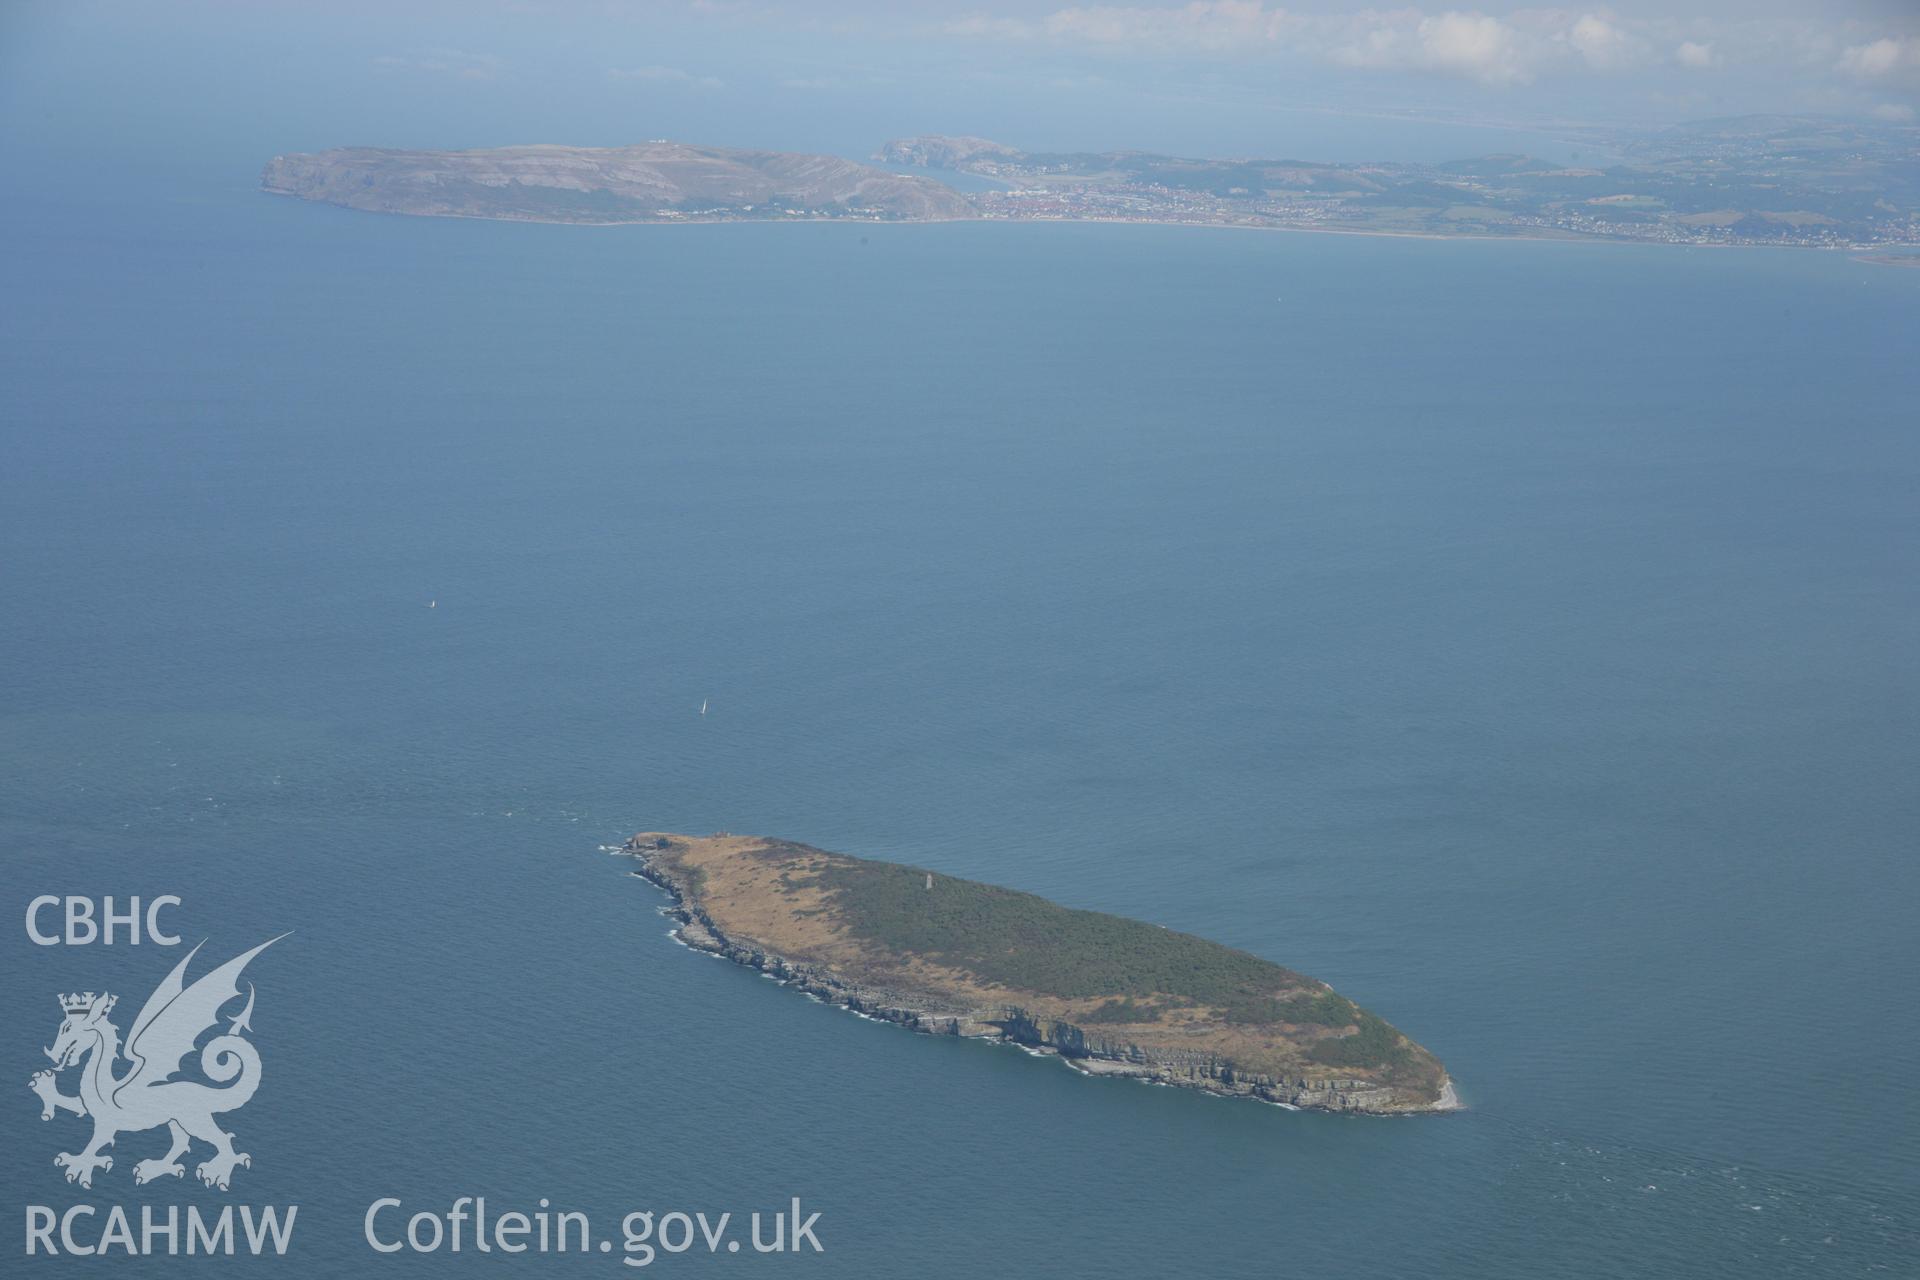 RCAHMW colour oblique aerial photograph of a cell of Penmon Priory on Puffin Island (or Priestholm). Taken on 14 August 2006 by Toby Driver